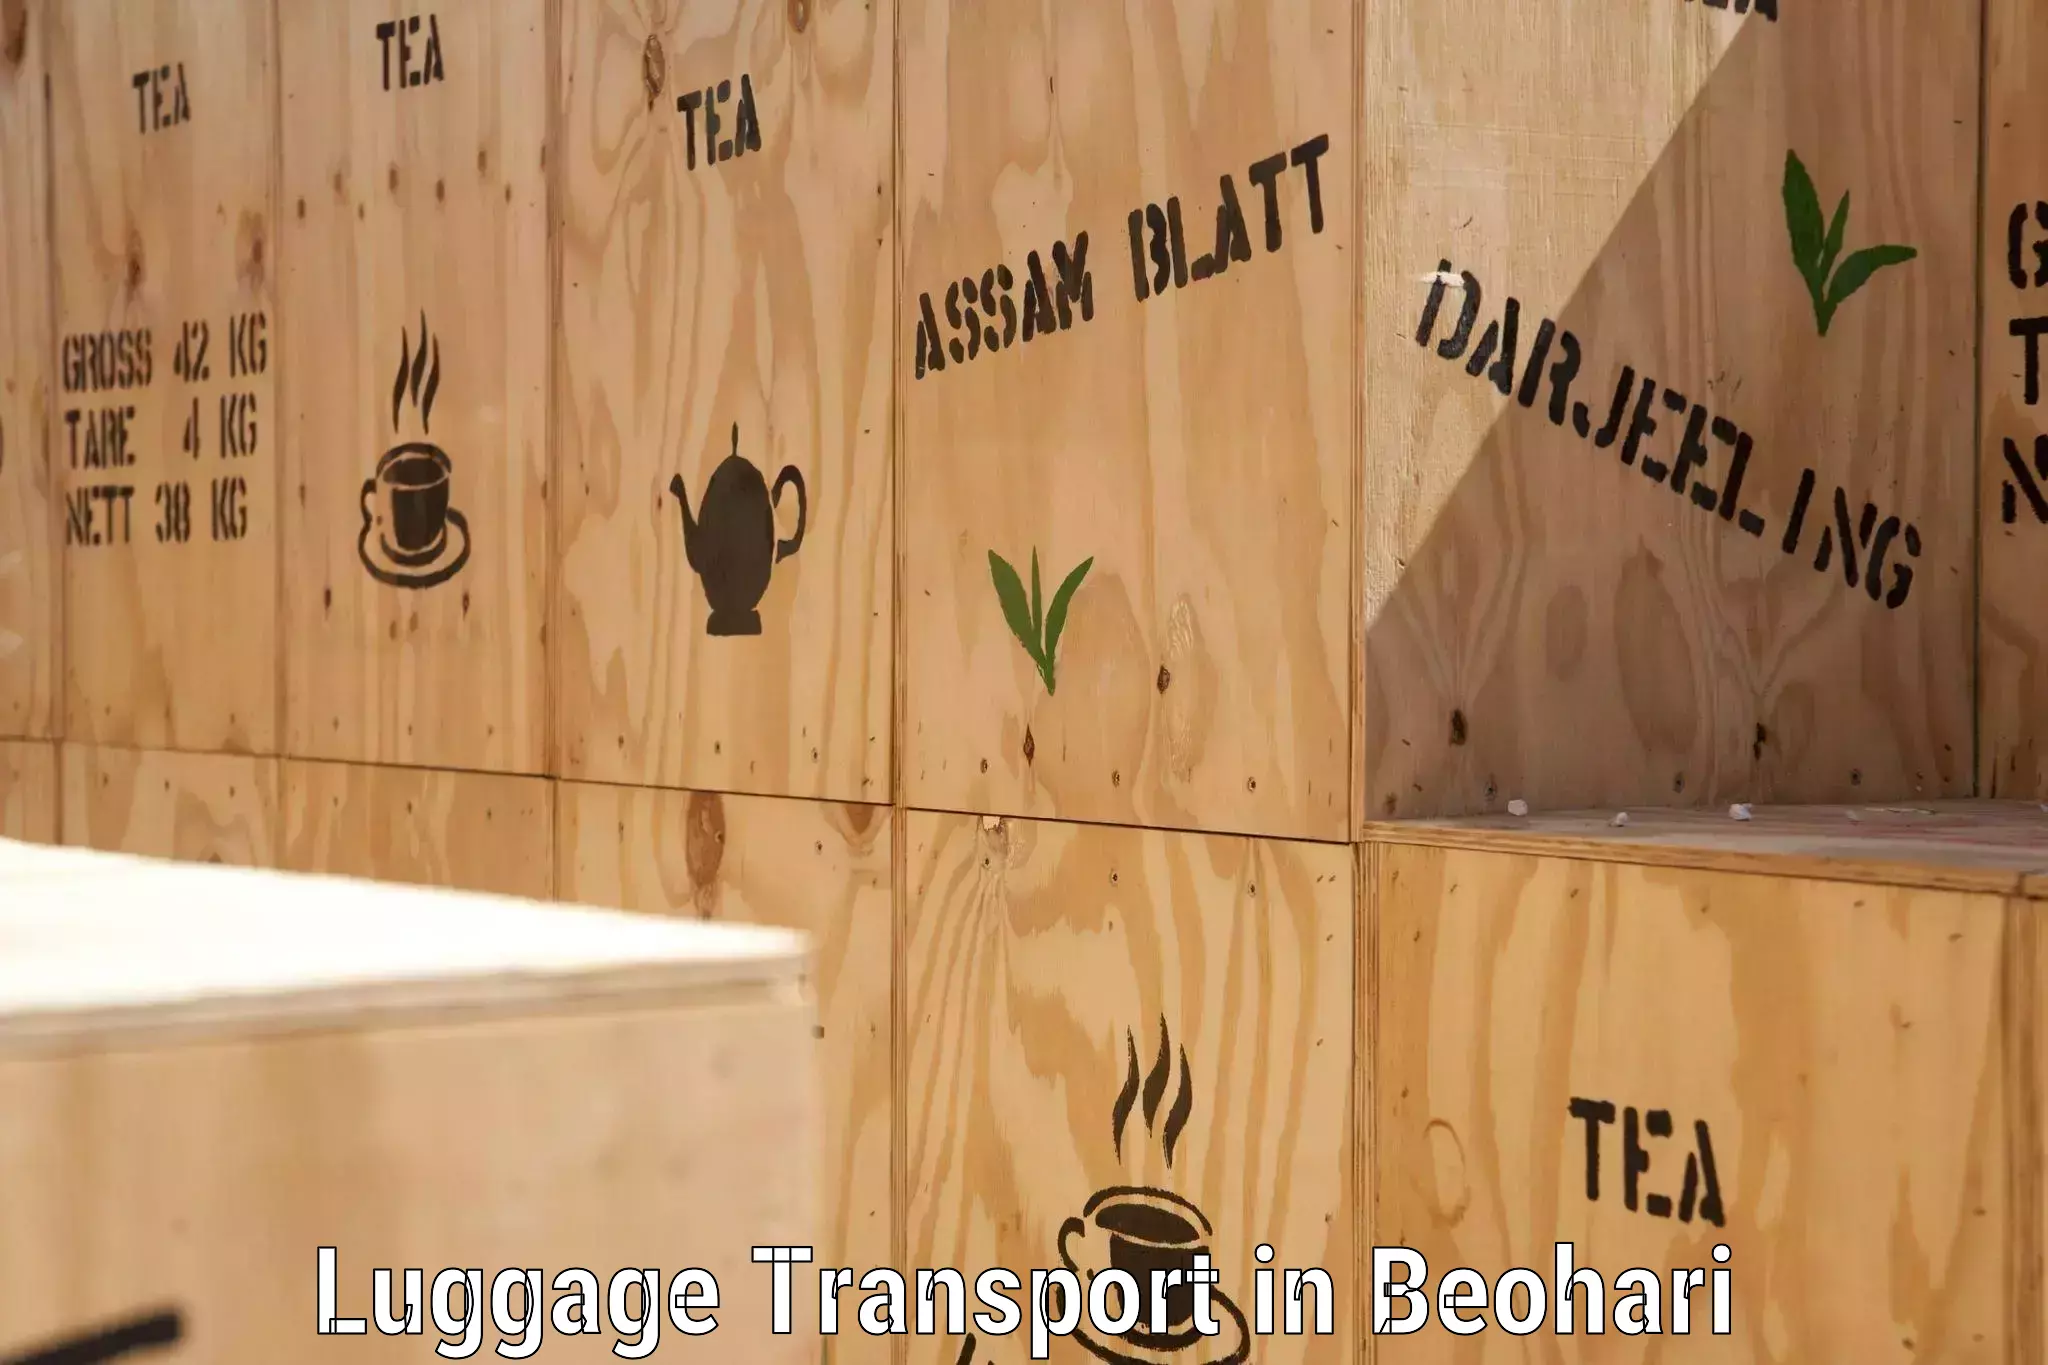 Express luggage delivery in Beohari